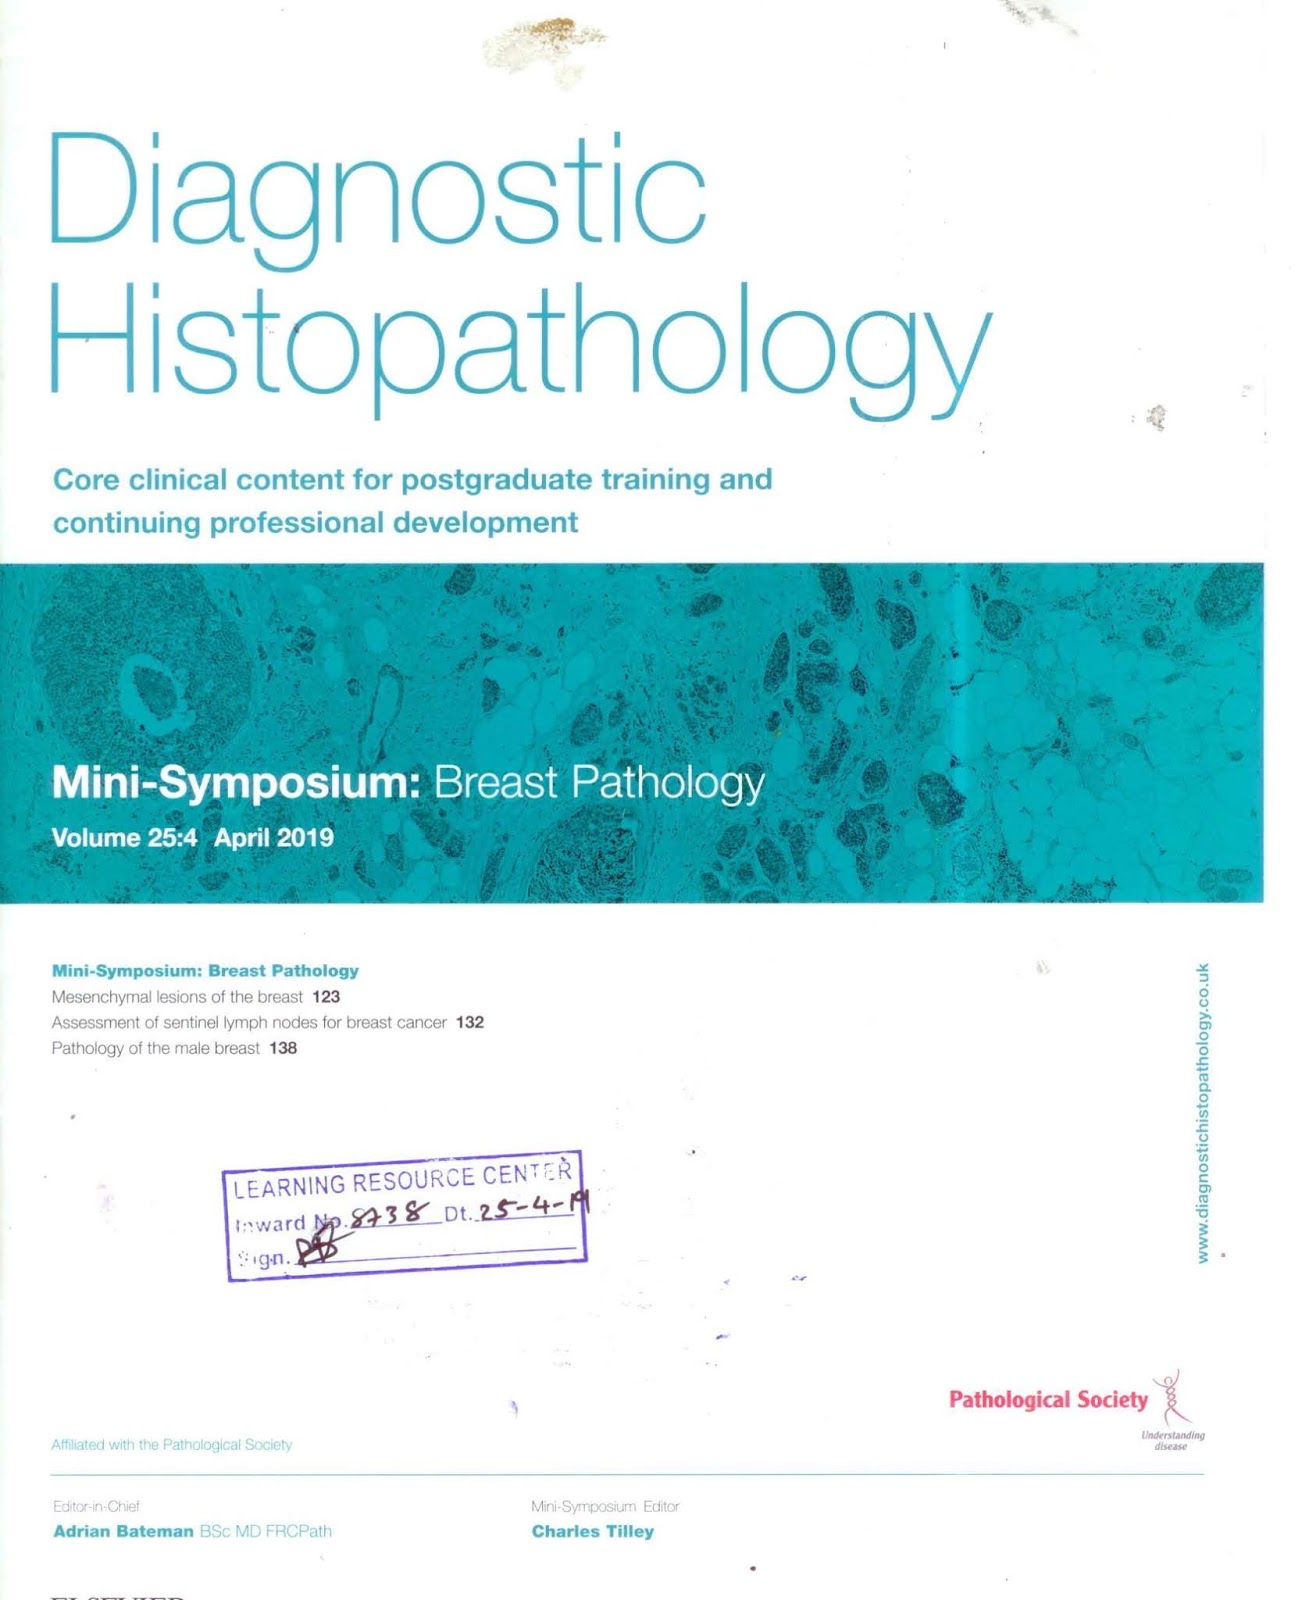 https://www.sciencedirect.com/journal/diagnostic-histopathology/vol/25/issue/4